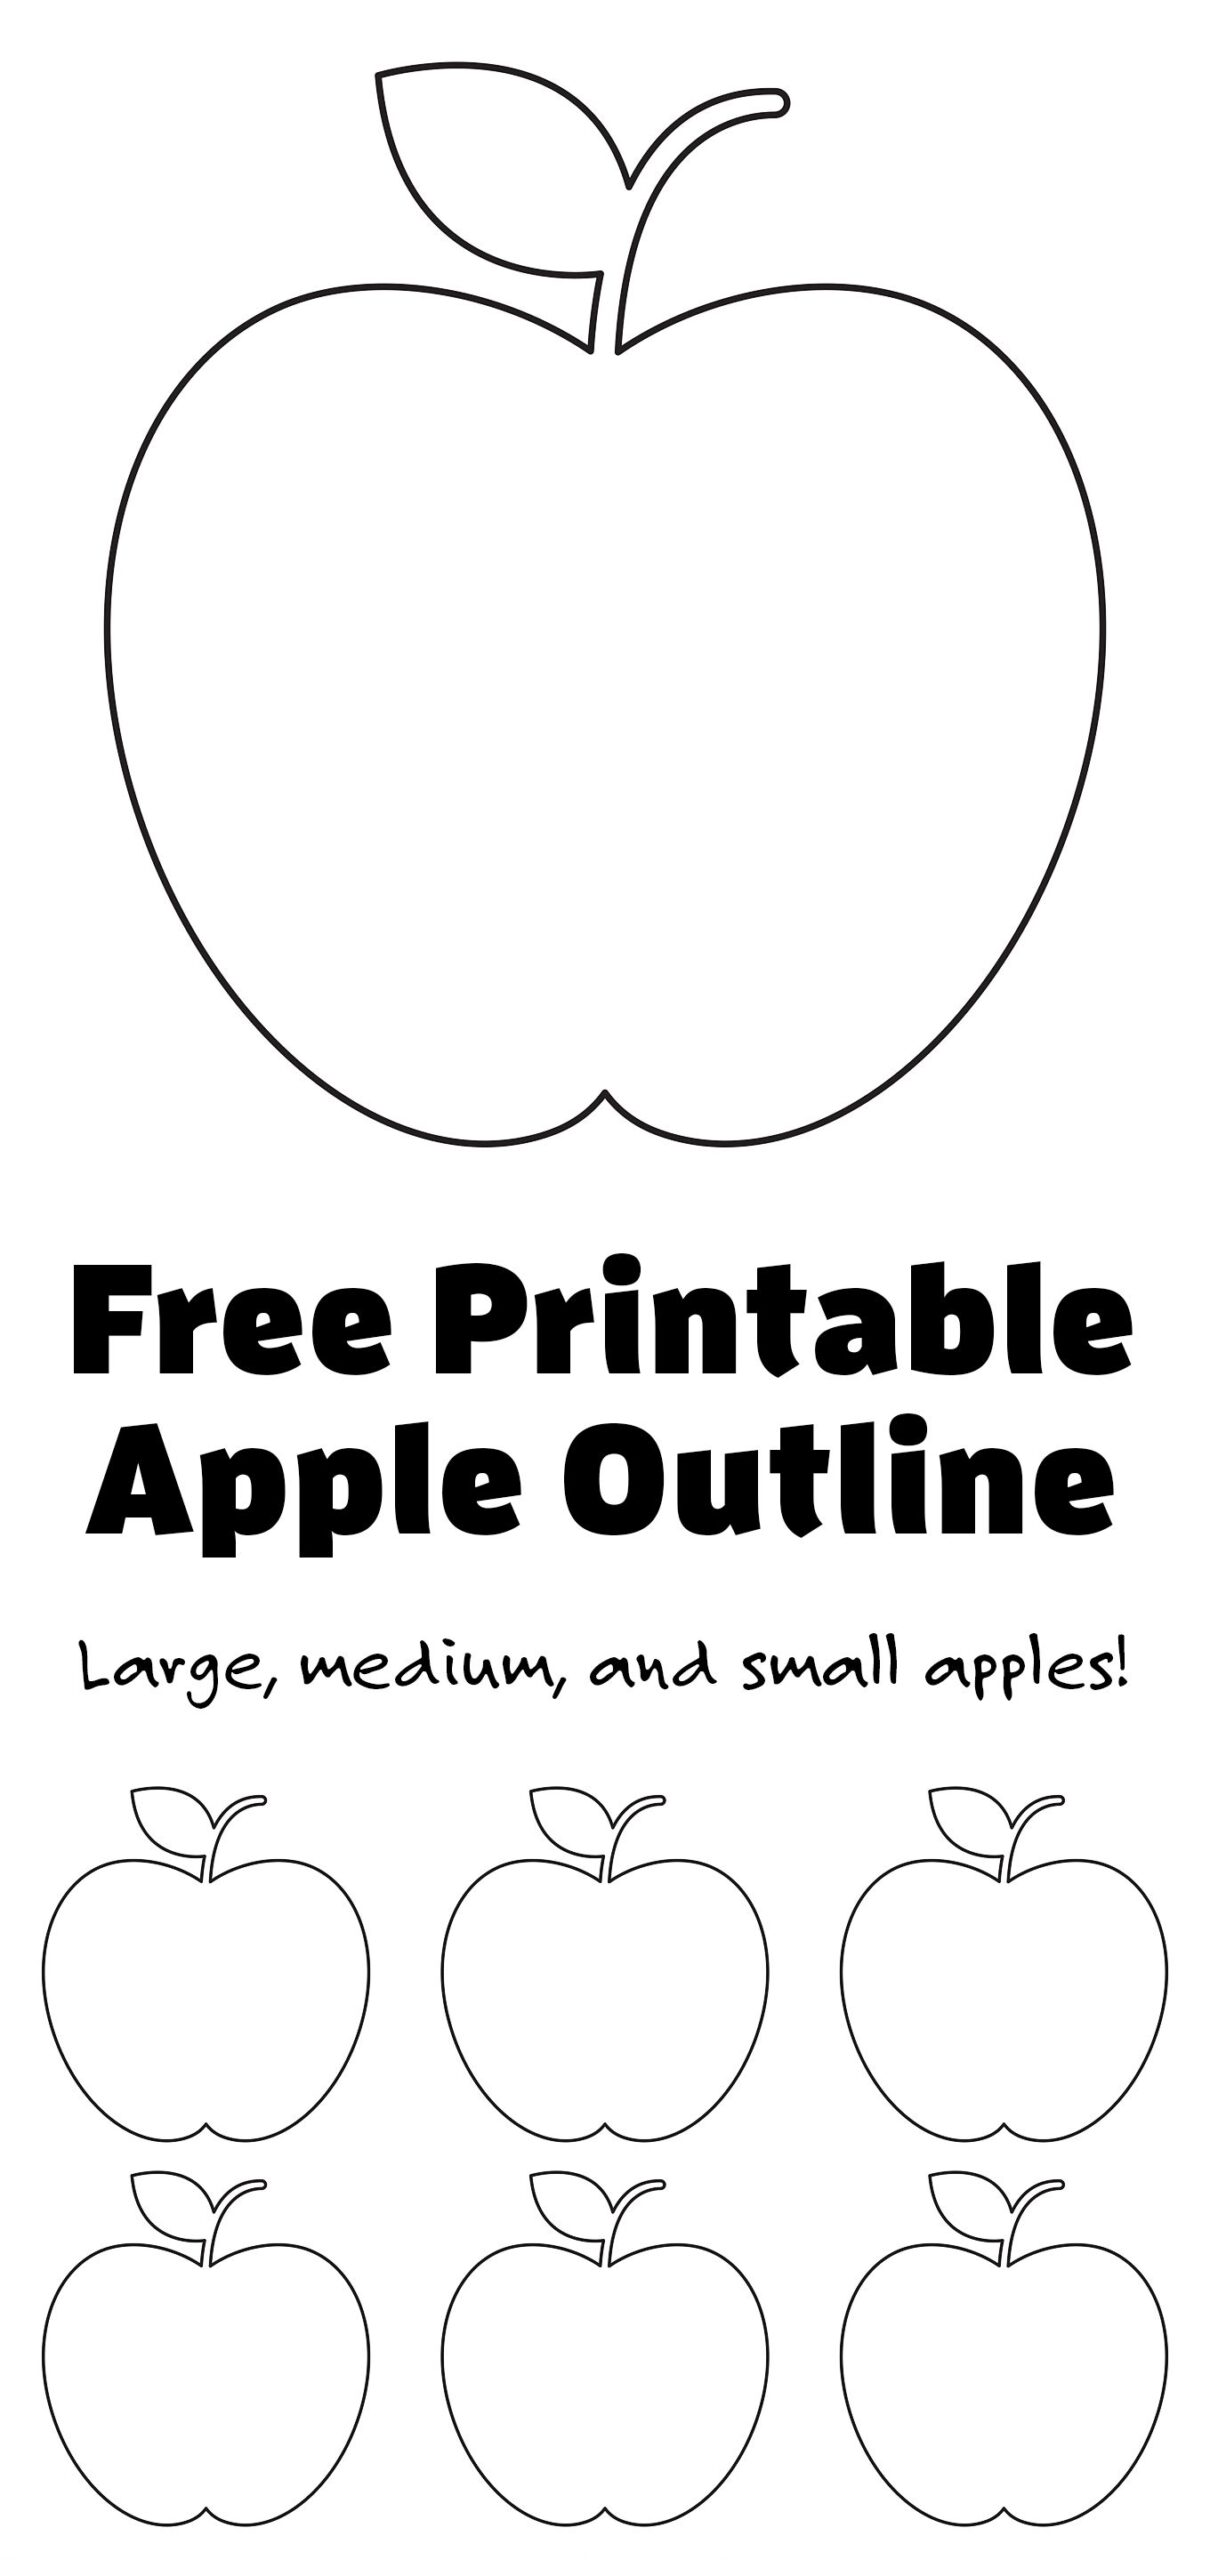 Free Printable Apple Outline For Crafts Apple Outline Toddler Apple Crafts Apple Crafts Preschool